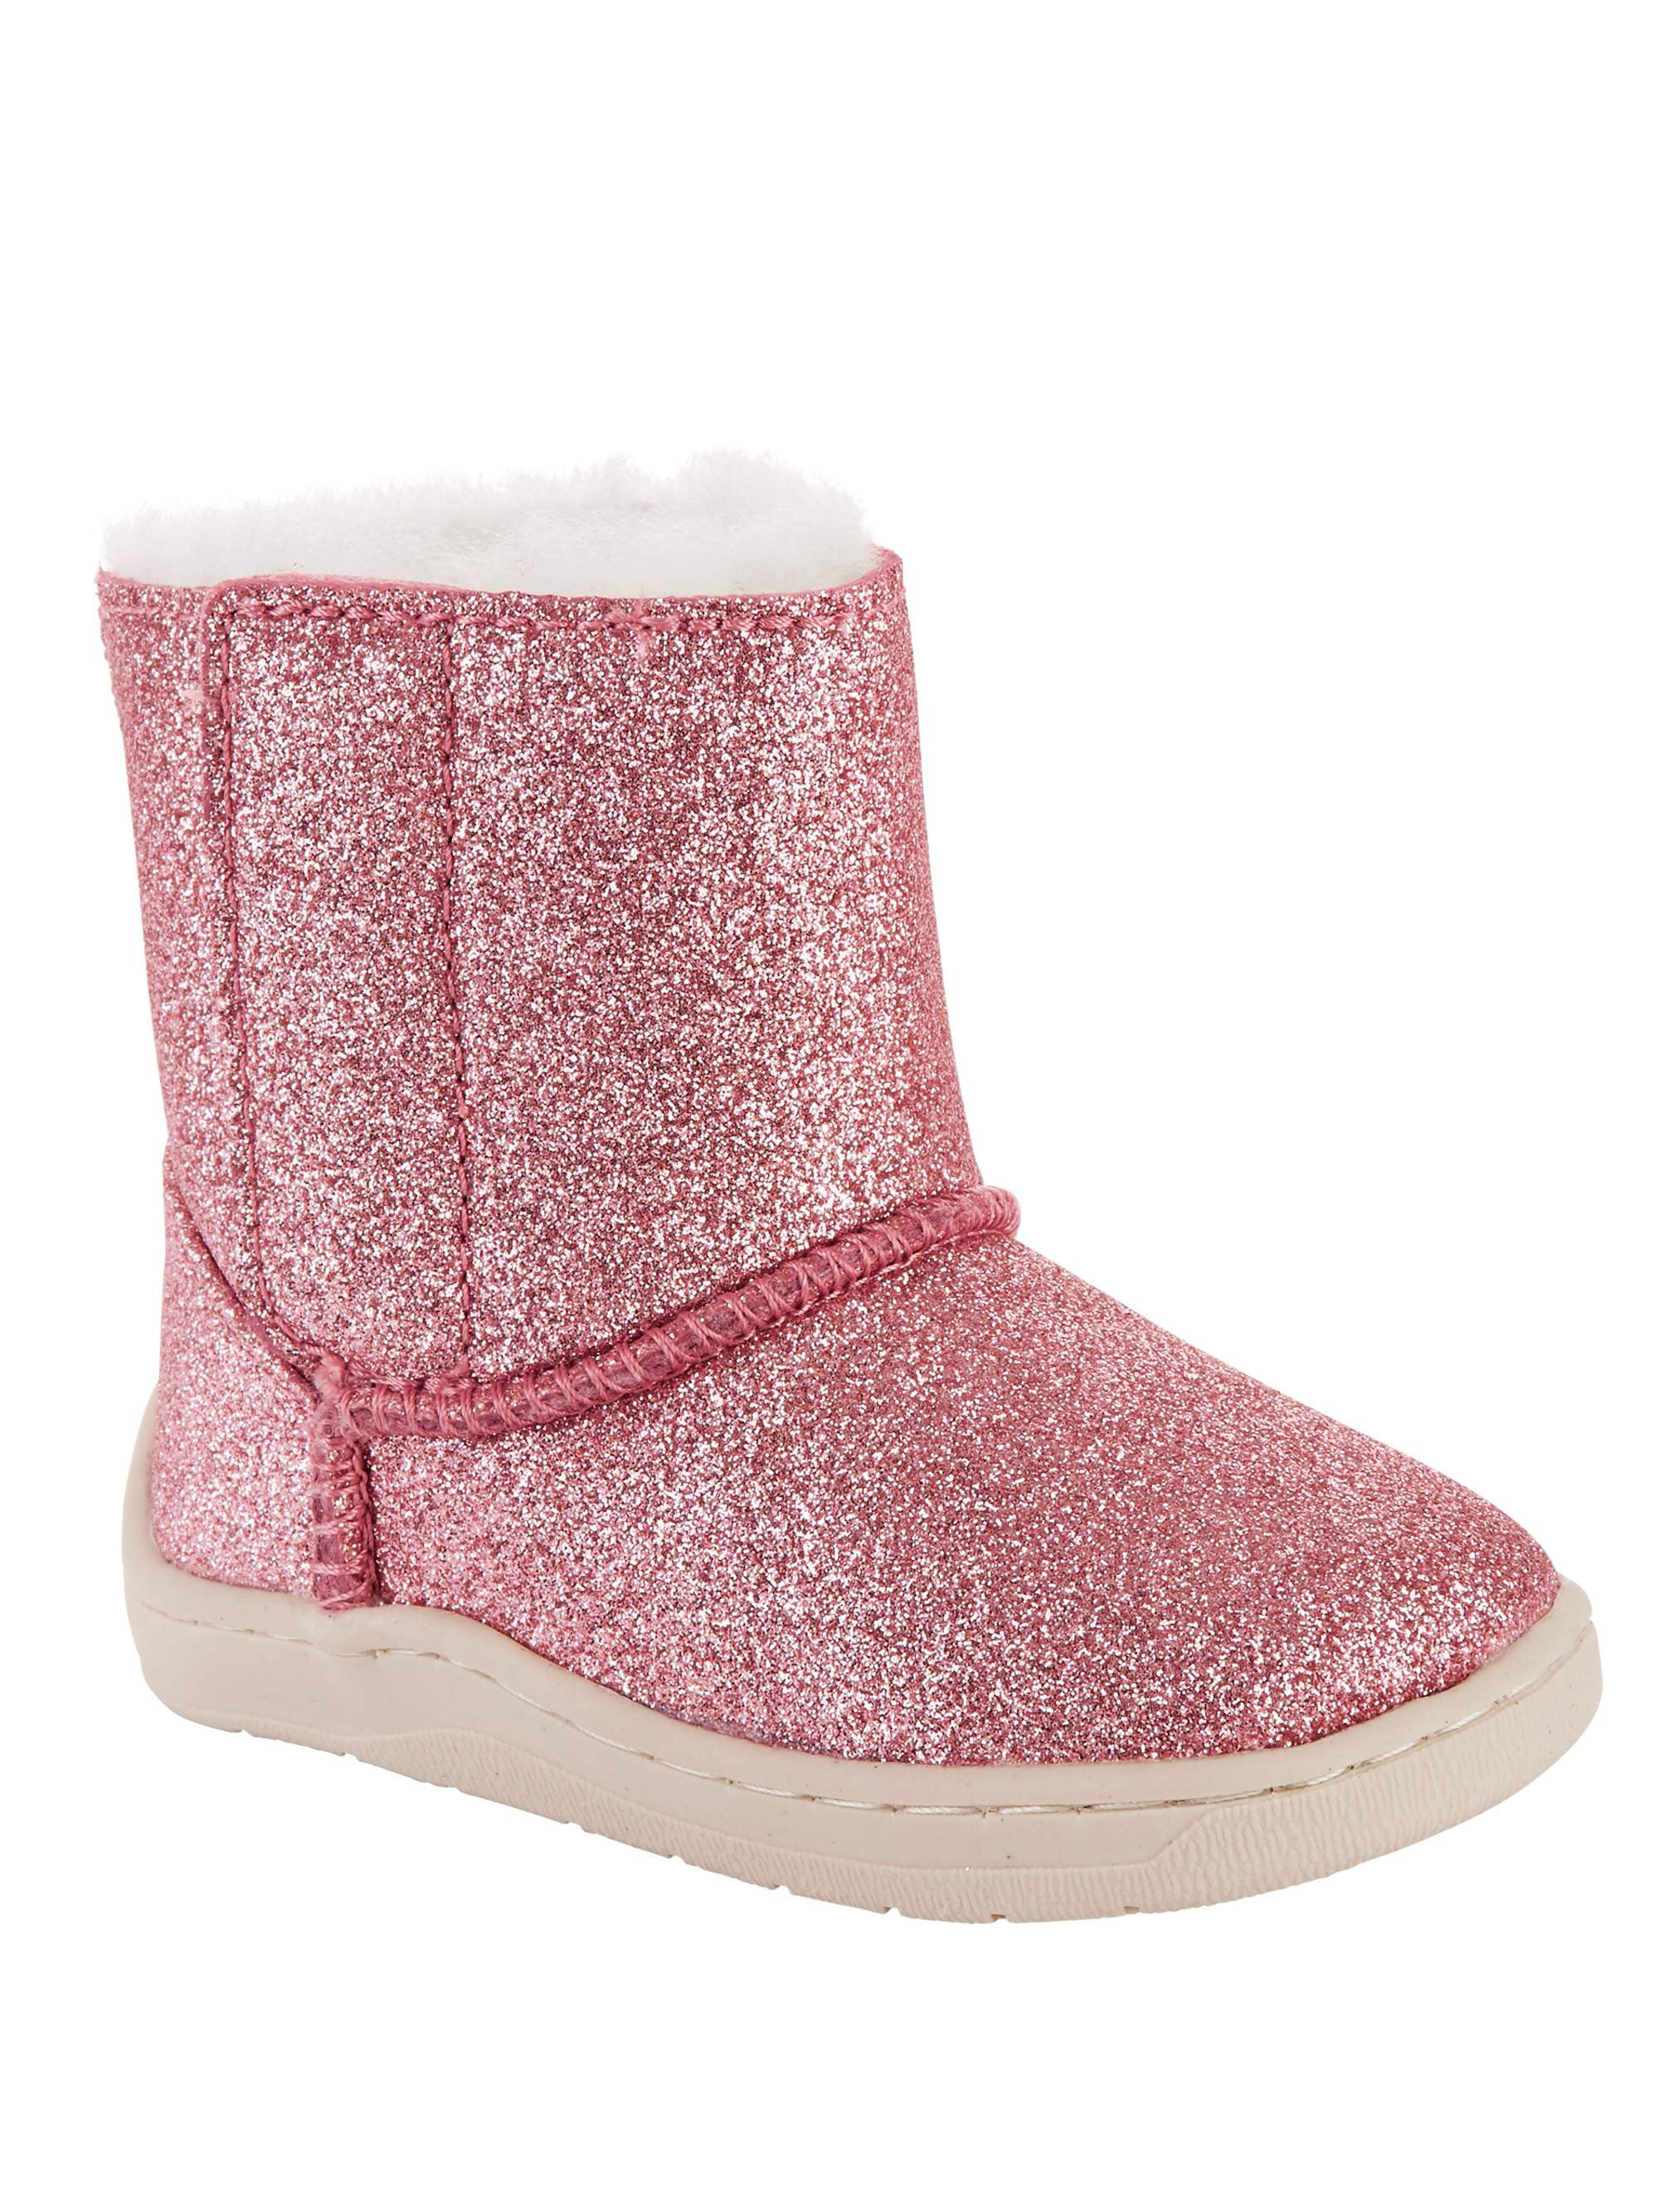 MD Sparkling Kids Shoes Girls Winter Colorful Sequin Snow Boots Toddler/Little Kid/Big Kid 